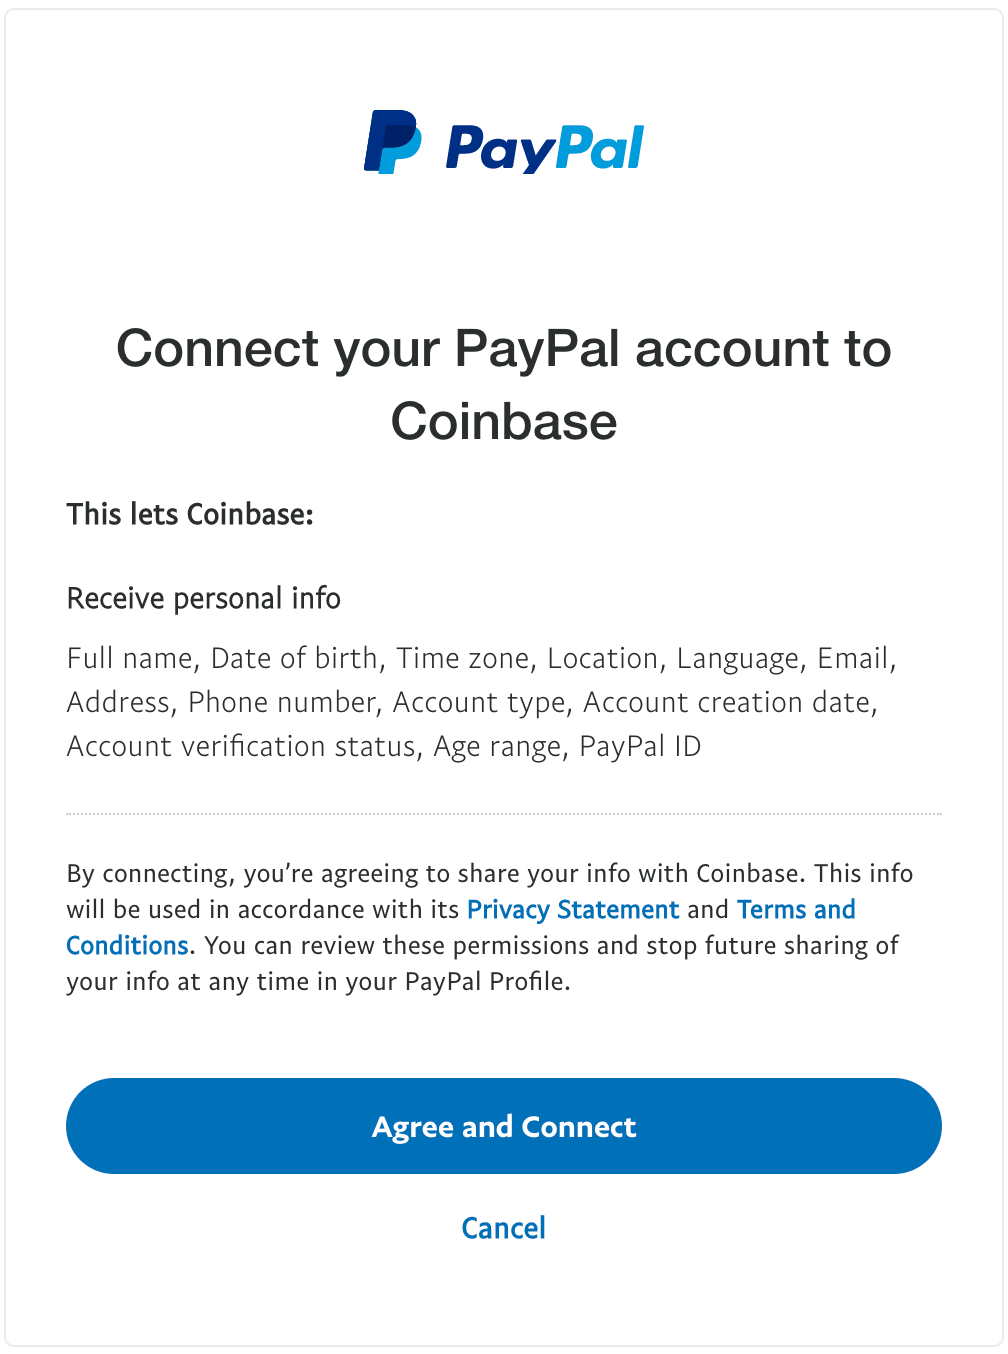 Conntect your PayPal account to Coinbase